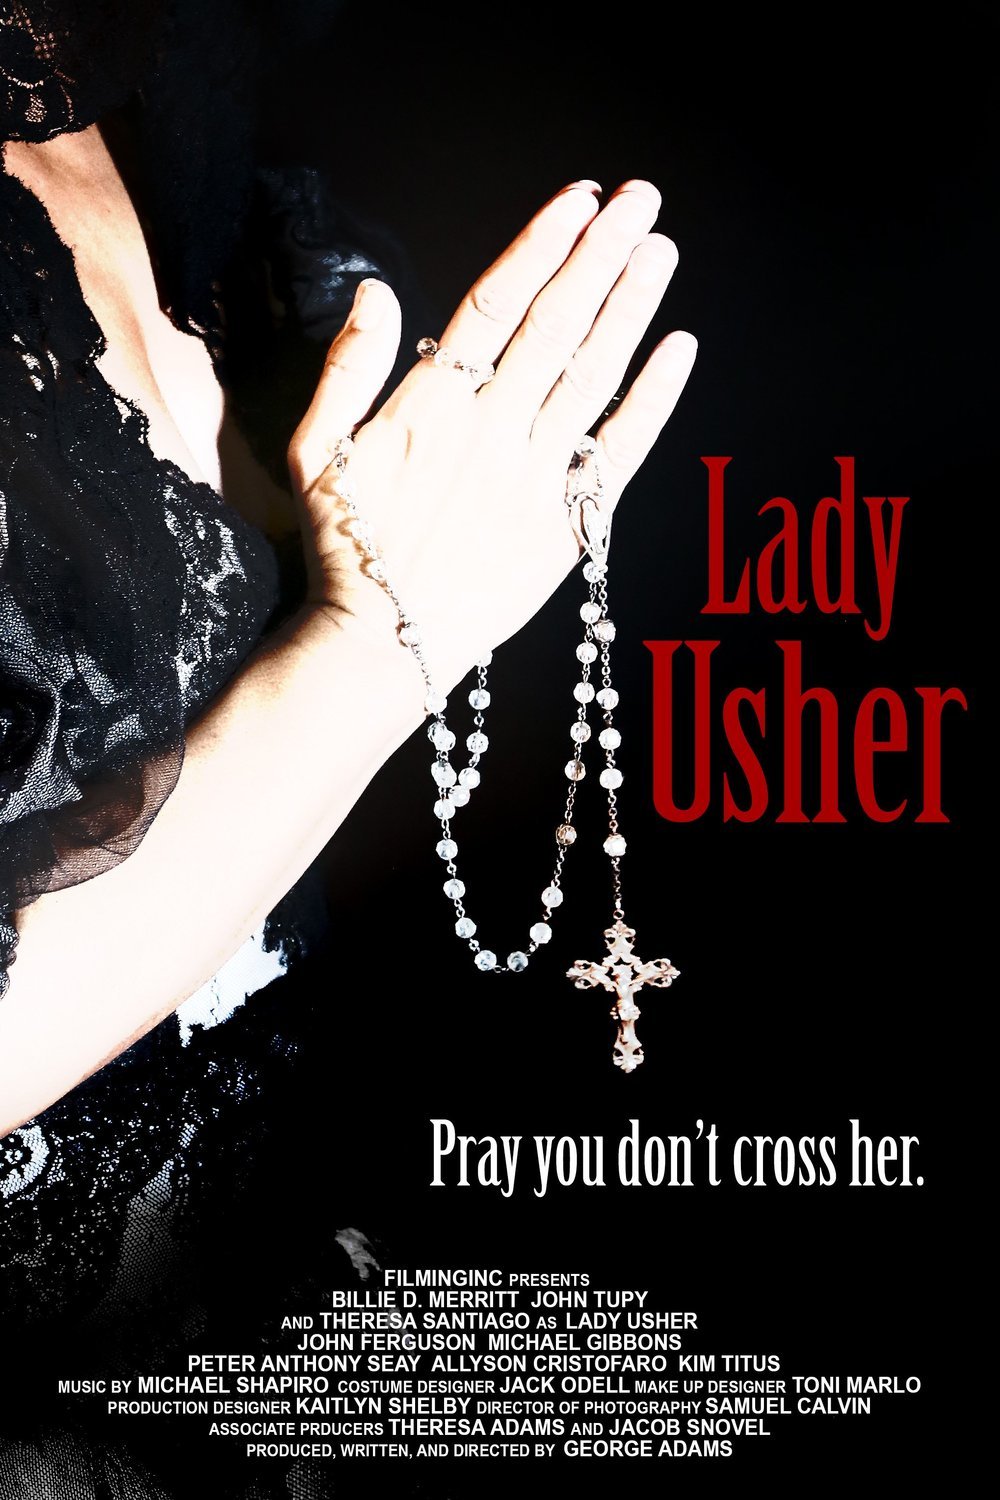 Poster of the movie Lady Usher